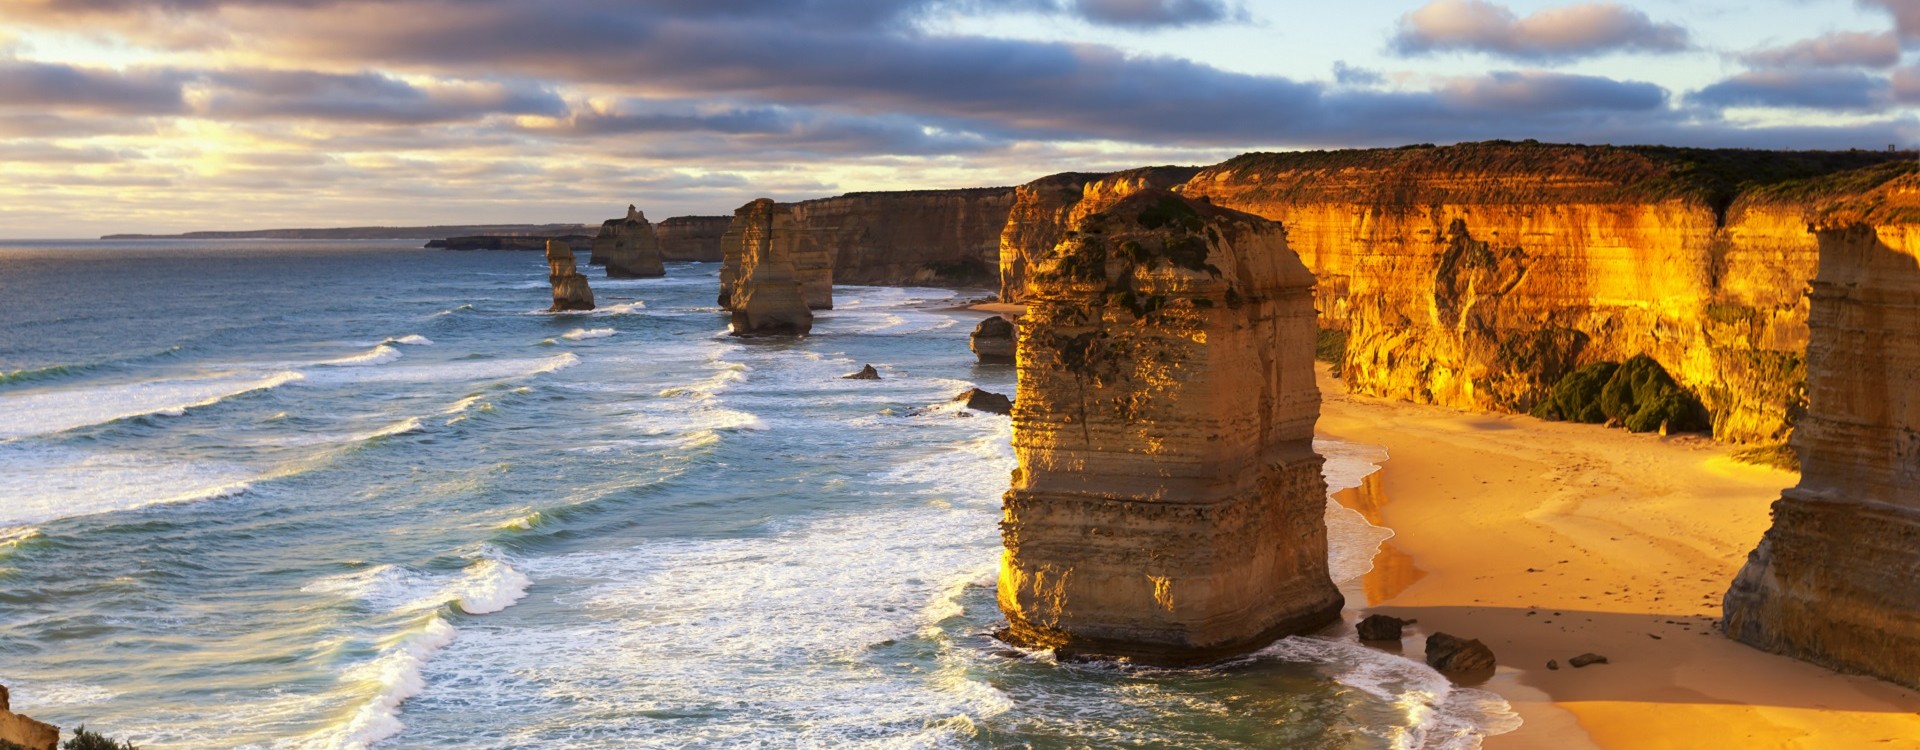 Drive along the scenic Great Ocean Road and view the world famous Twelve Apostles